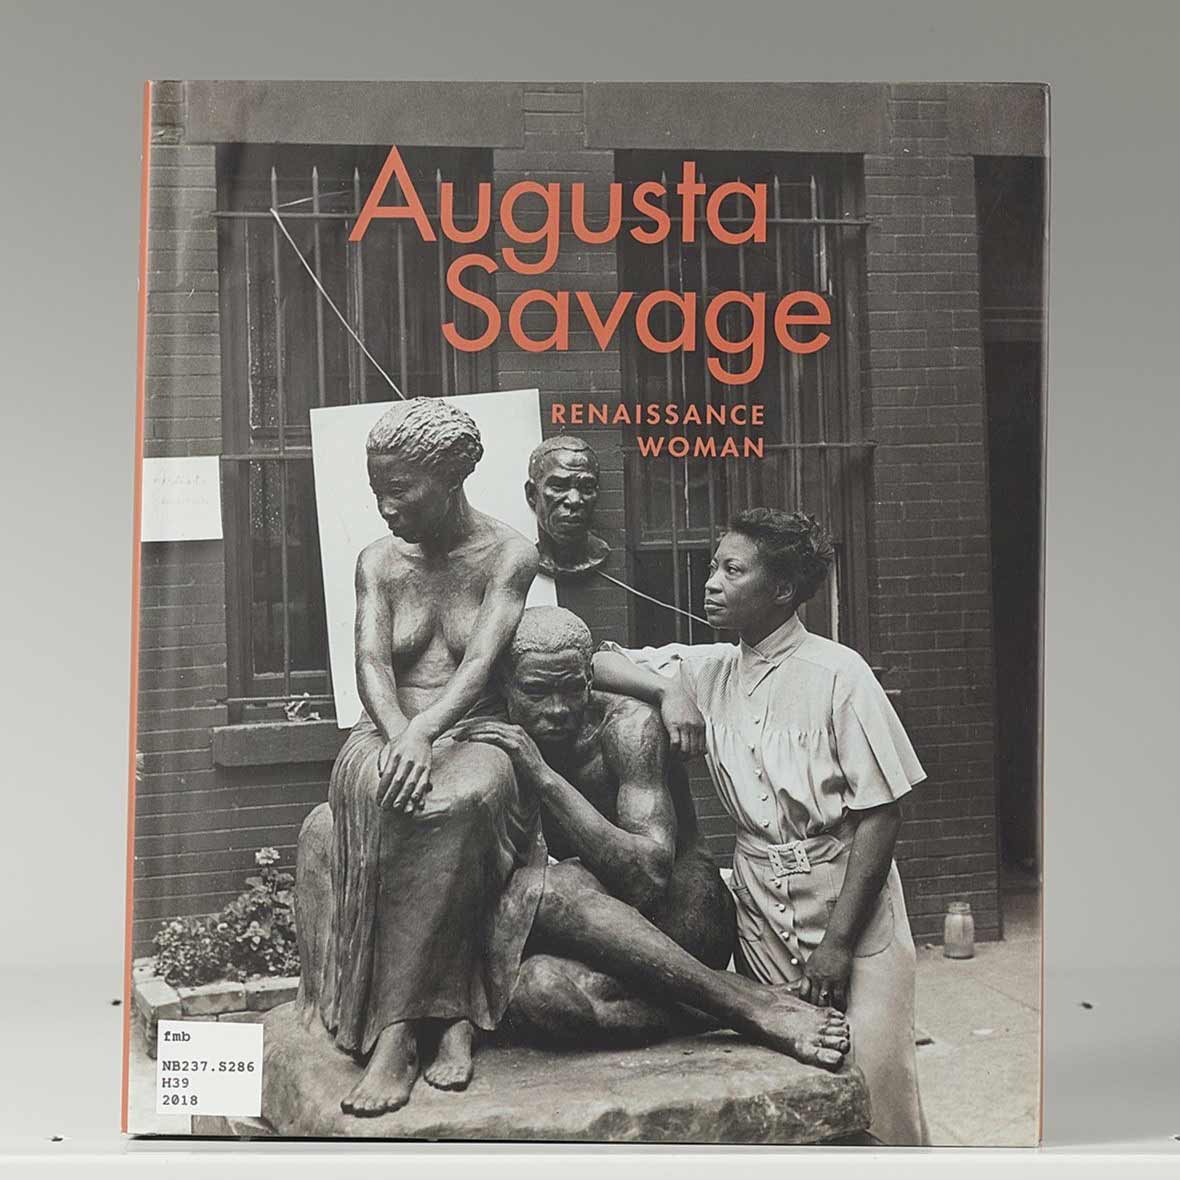 Book cover on a white shelf featuring a sculptor with a large statue of two figures